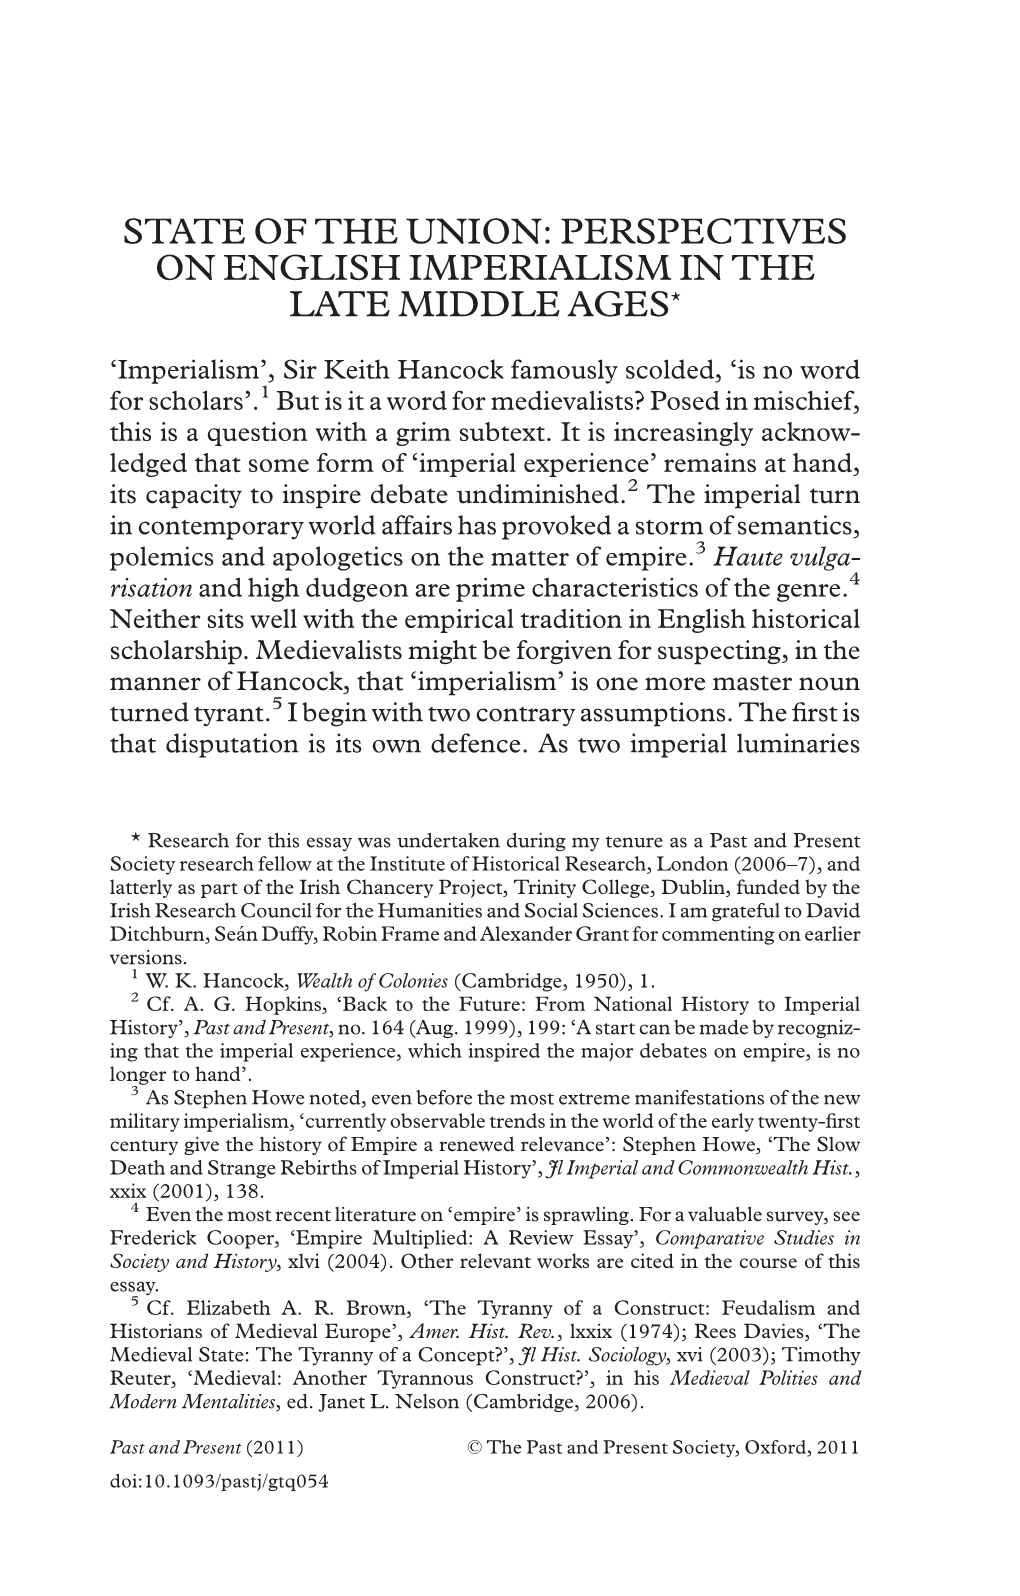 State of the Union: Perspectives on English Imperialism in the Late Middle Ages*